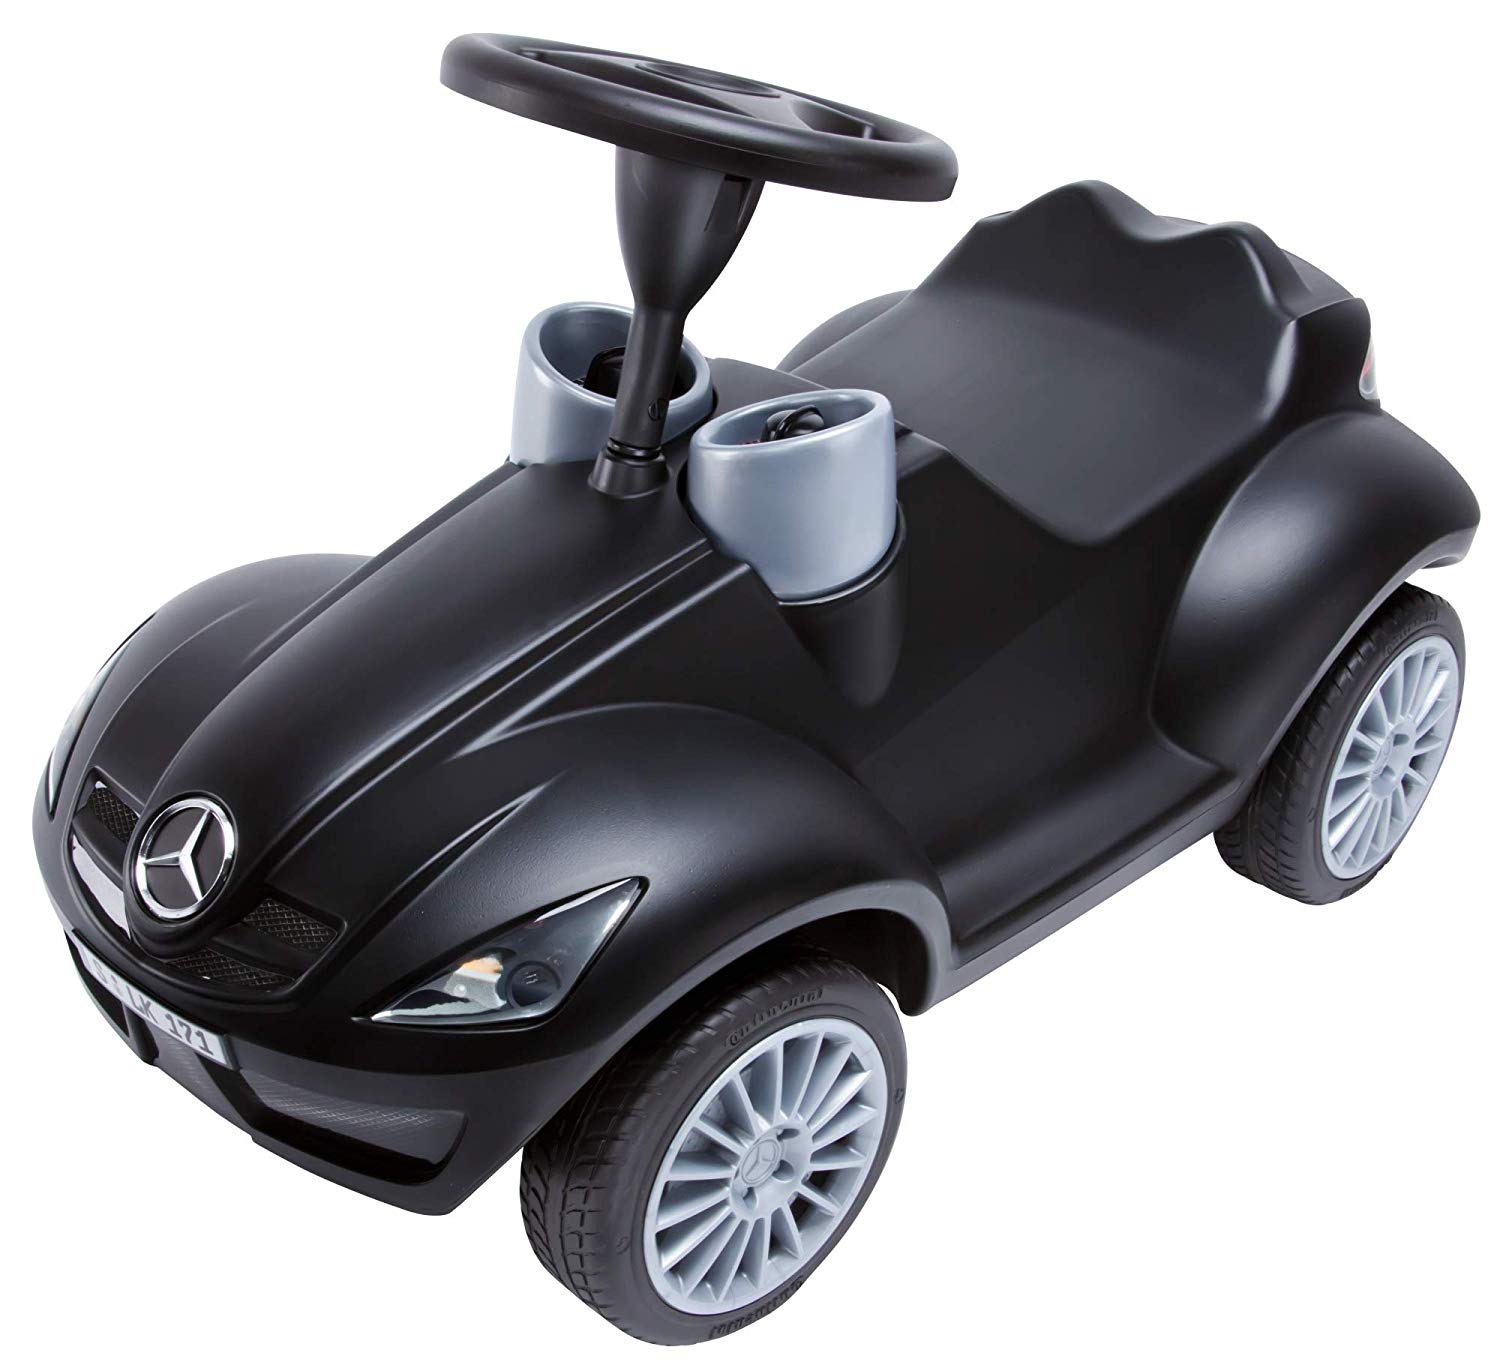 Bobby Car SLK Benz by BIG scoot along toys are great ride on toys for kids